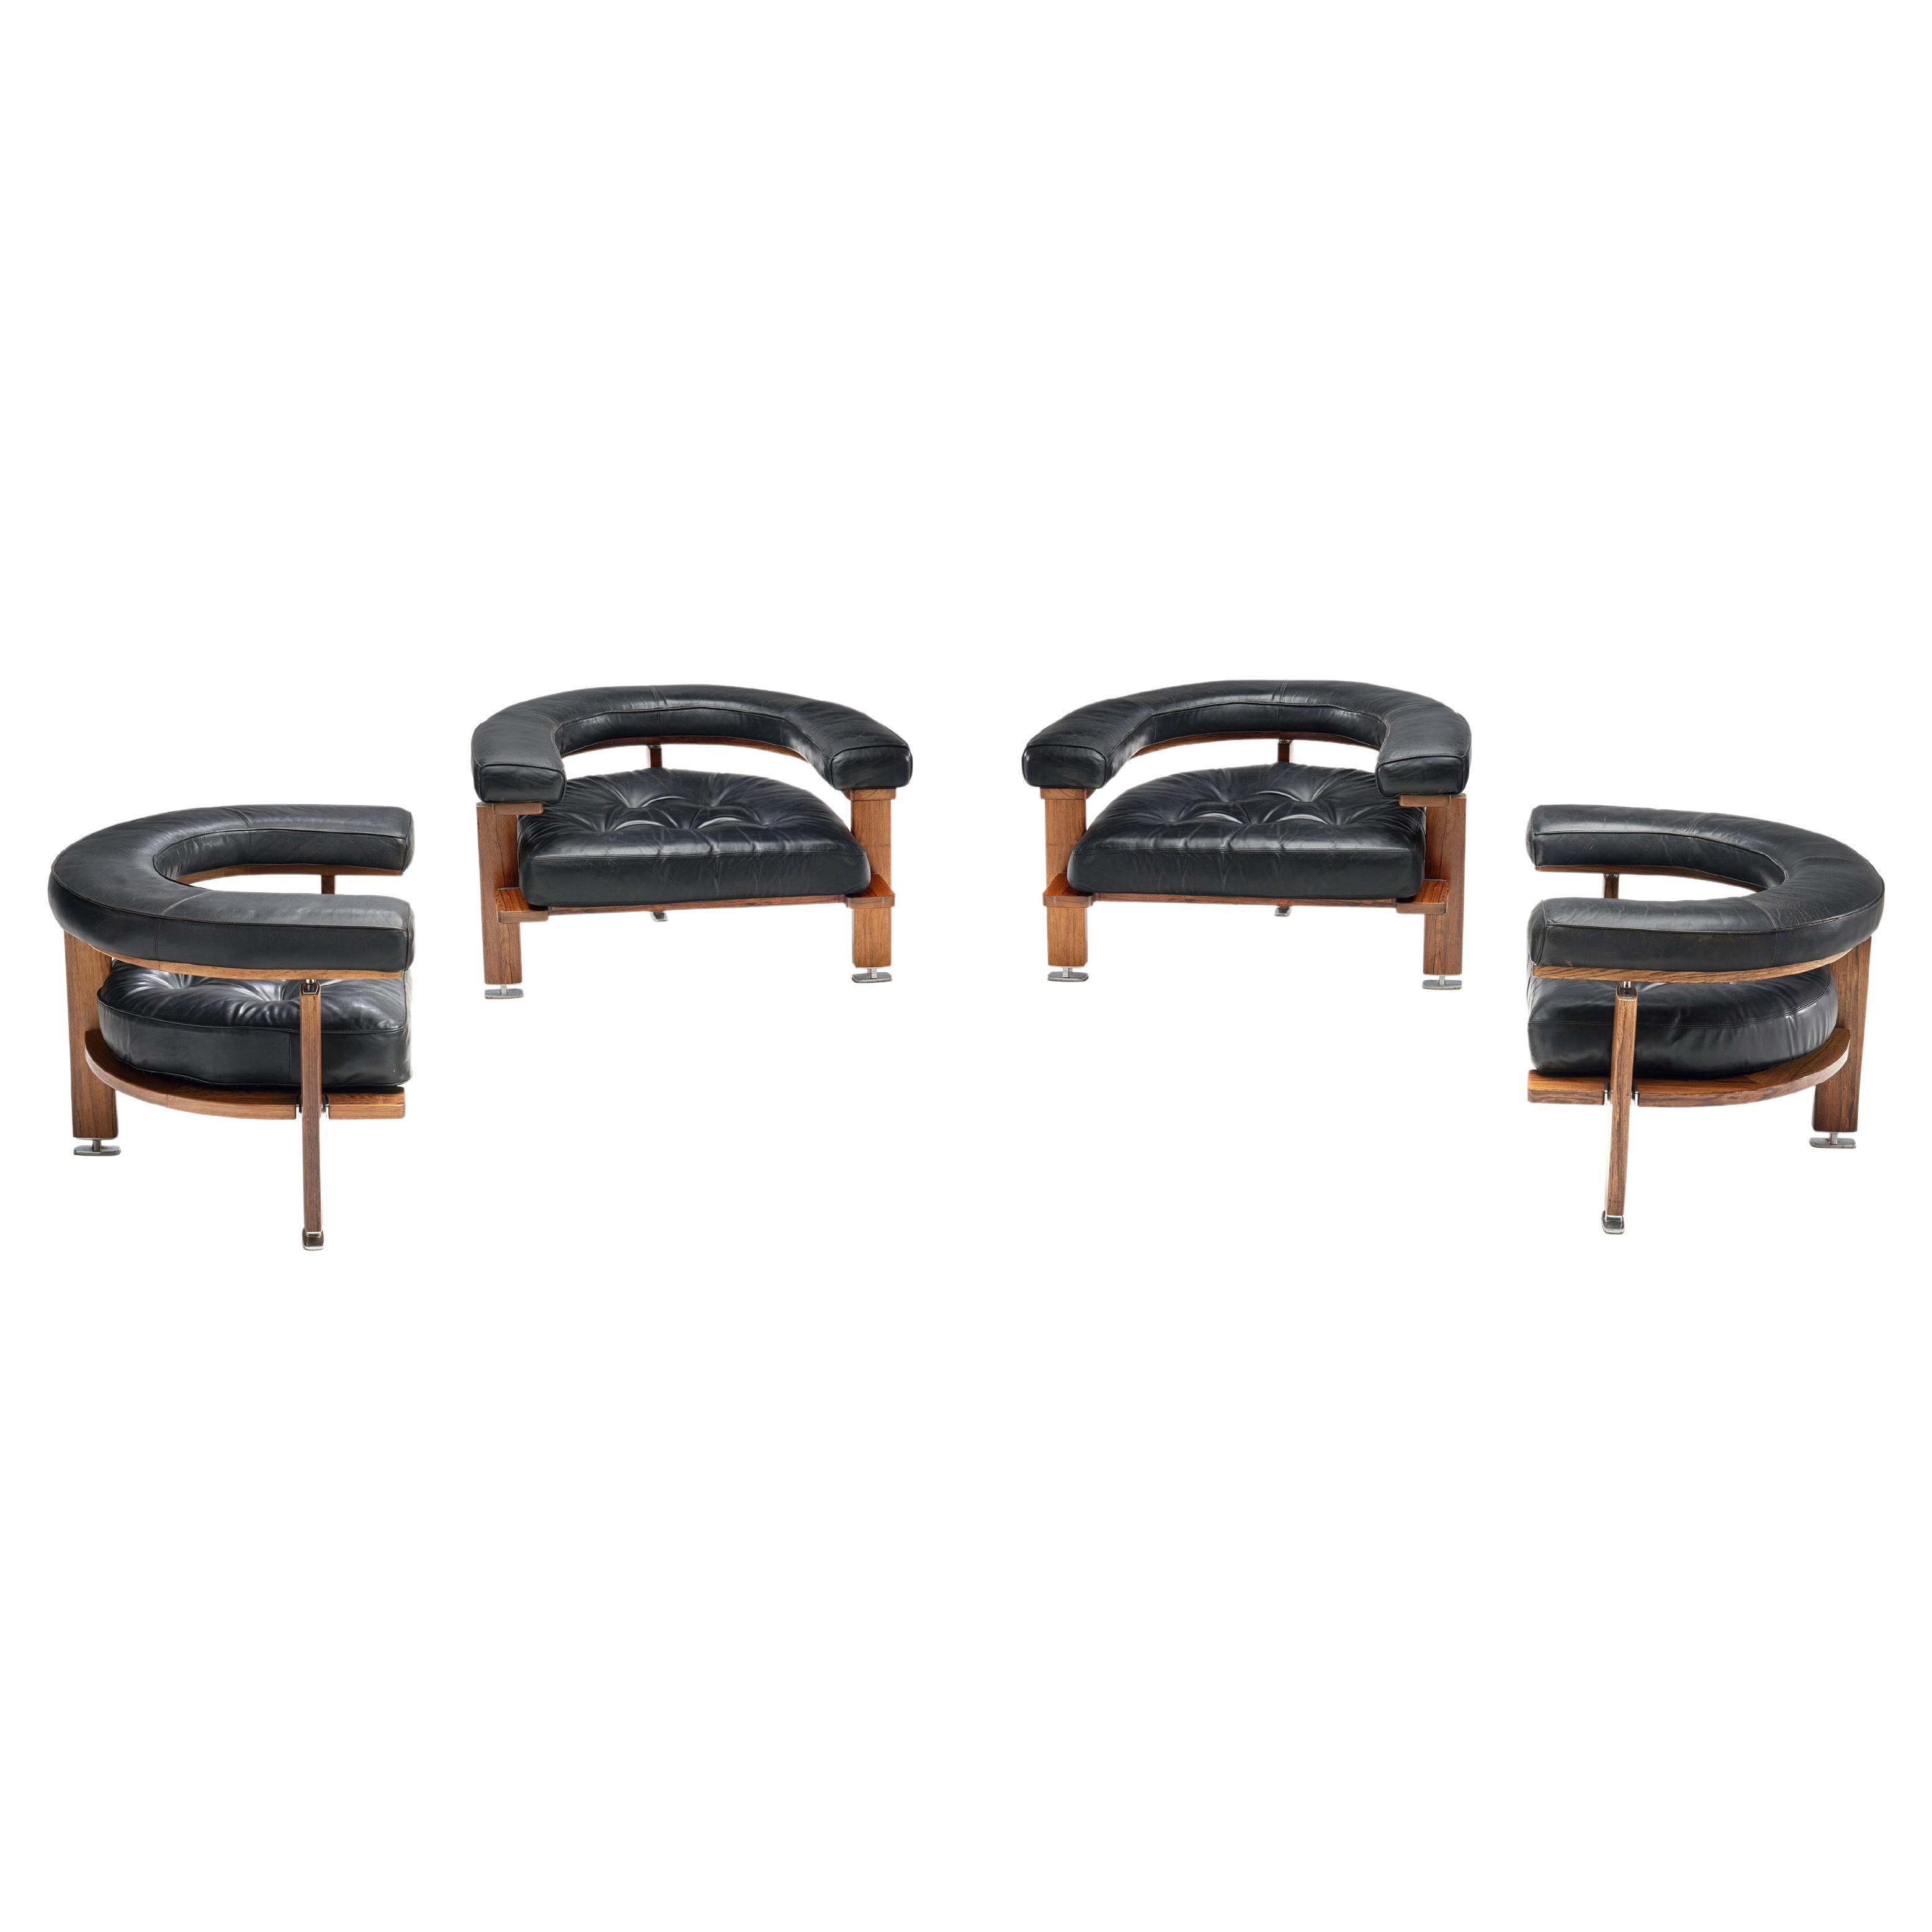 Set of Four "Polar" Lounge Chairs by Esko Pajamies, Finland 1960s For Sale